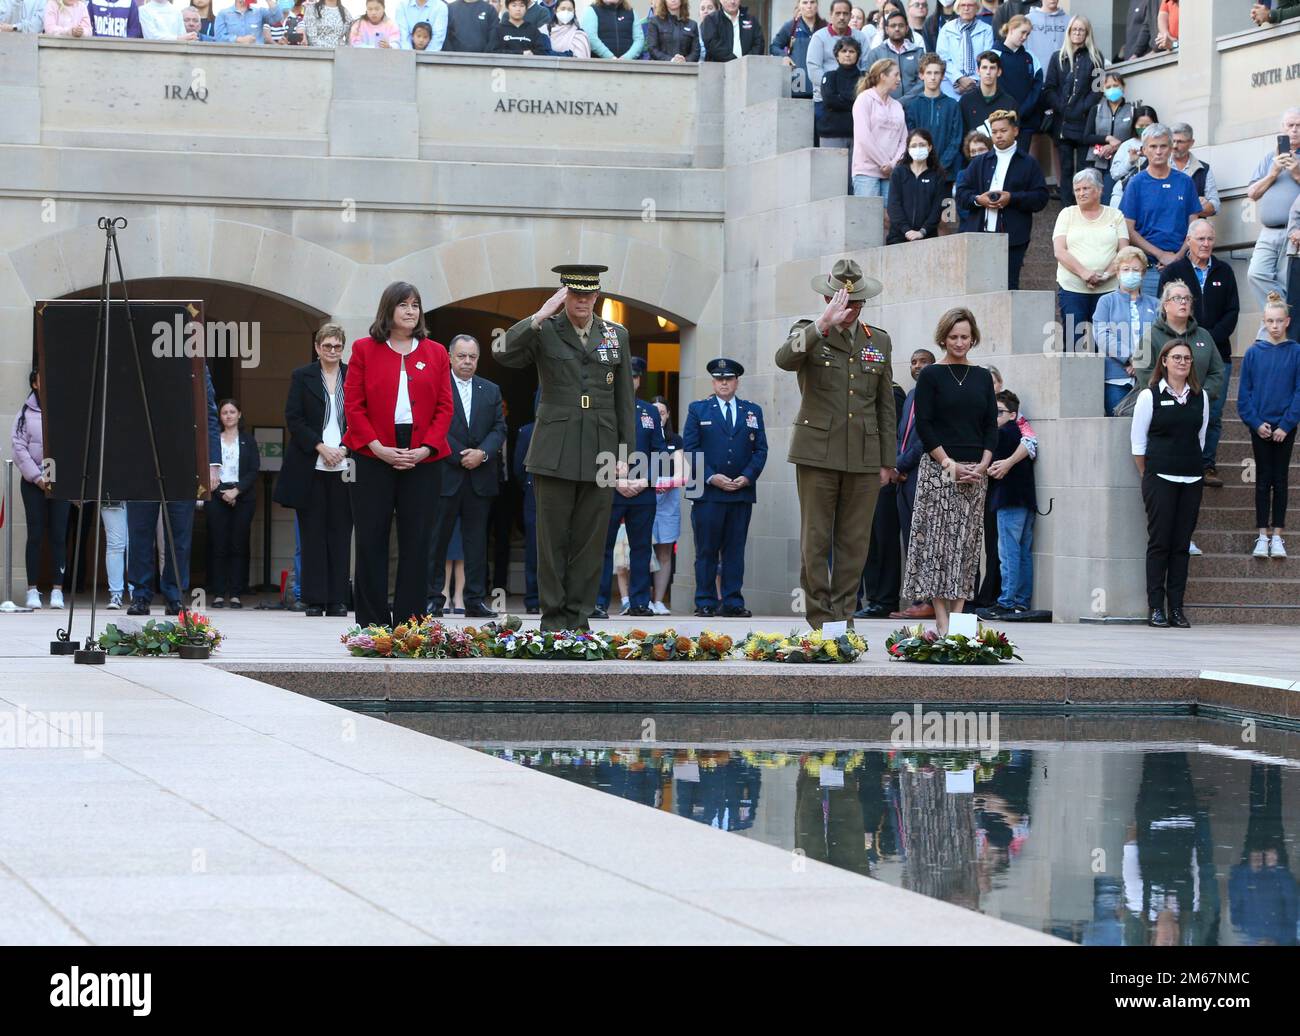 The 38th Commandant of the Marine Corps, Gen. David H. Berger lays a wreath in honor at the Last Post Ceremony for Private William George Taylor at the Australian War Memorial, Canberra, Australia, April 13, 2022. Private Taylor served in the Australian Imperial Force during World War I where he was killed in action on April 13, 1918. The Last Post Ceremony is held every night to share the story behind one of the names on the Roll of Honour. Stock Photo